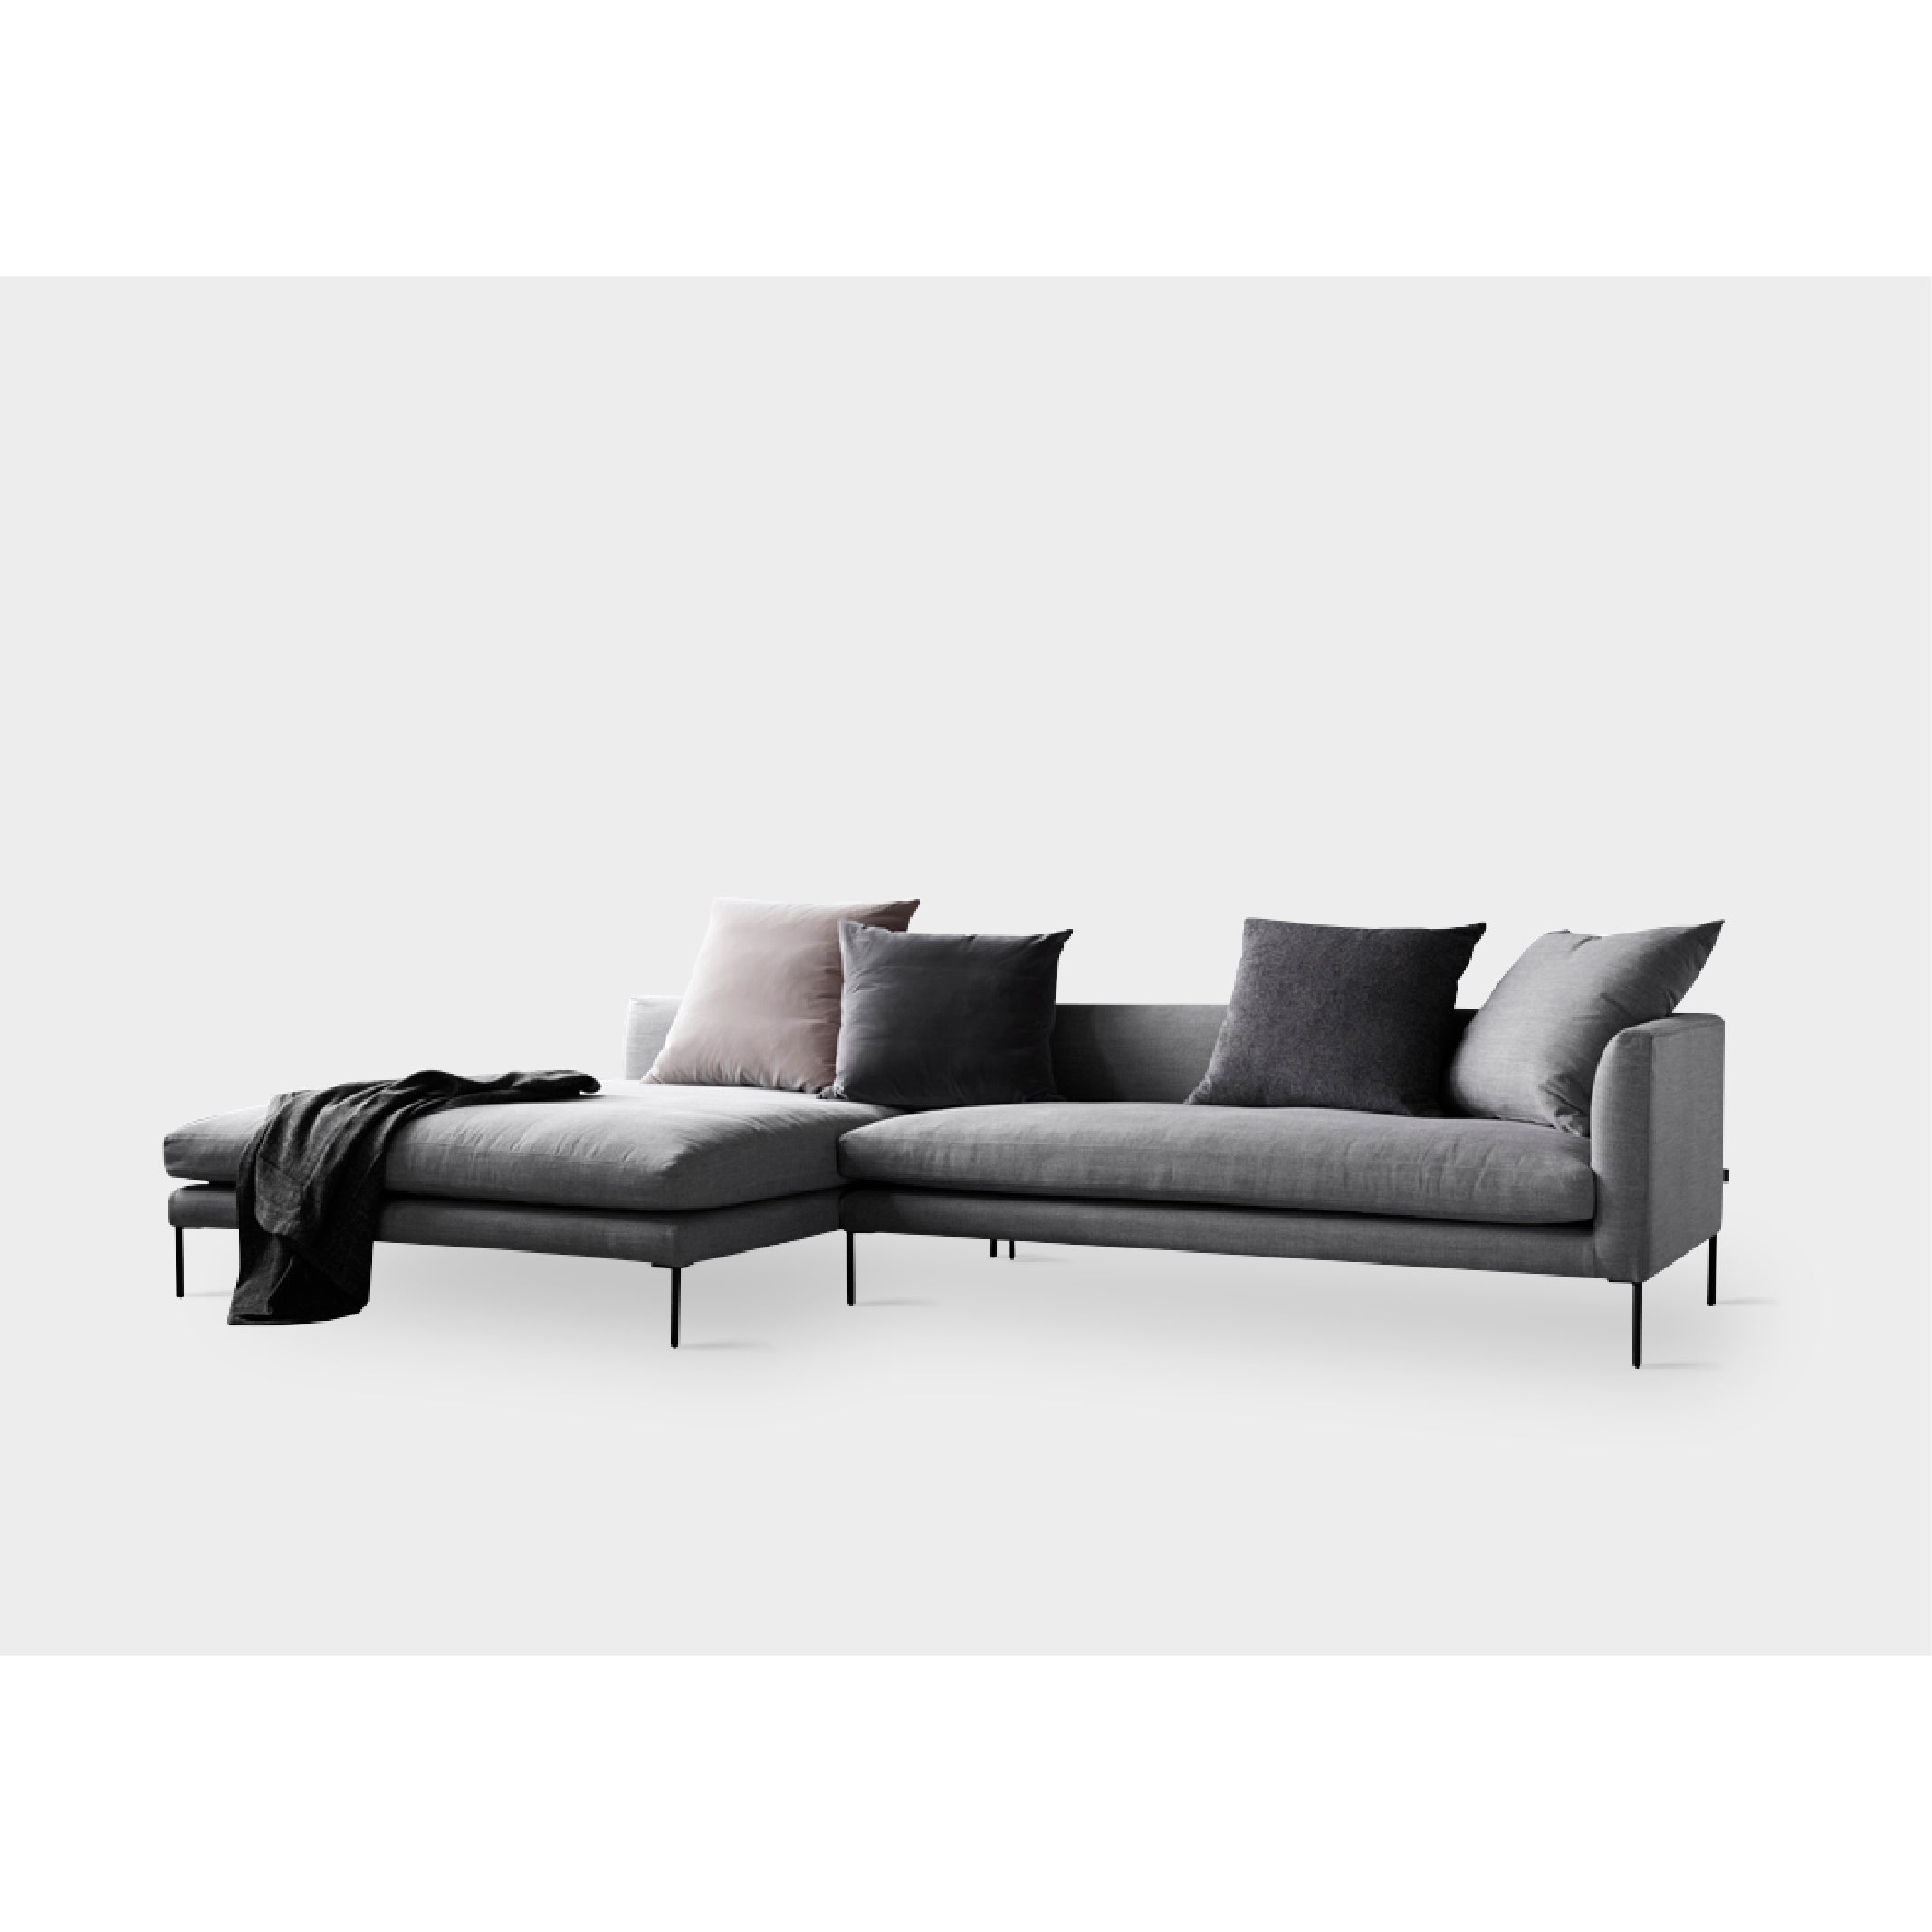 BLADE - 'L' Shape Sofa with Chaise (Left)